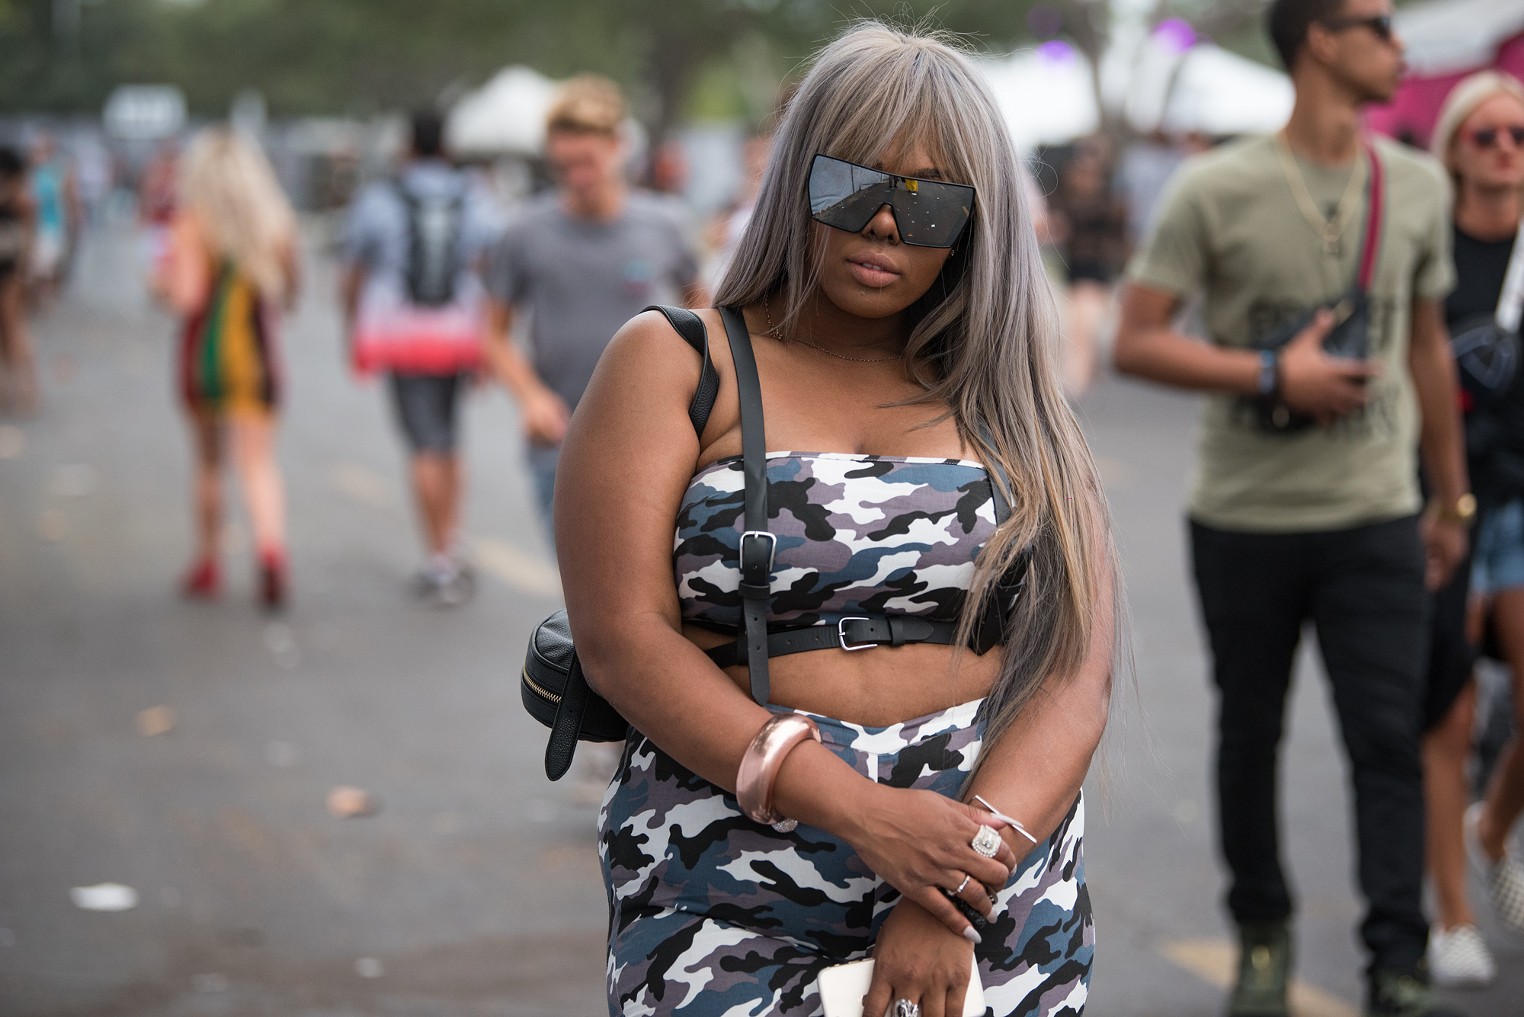 The Fashion Styles at Rolling Loud 2018 Miami